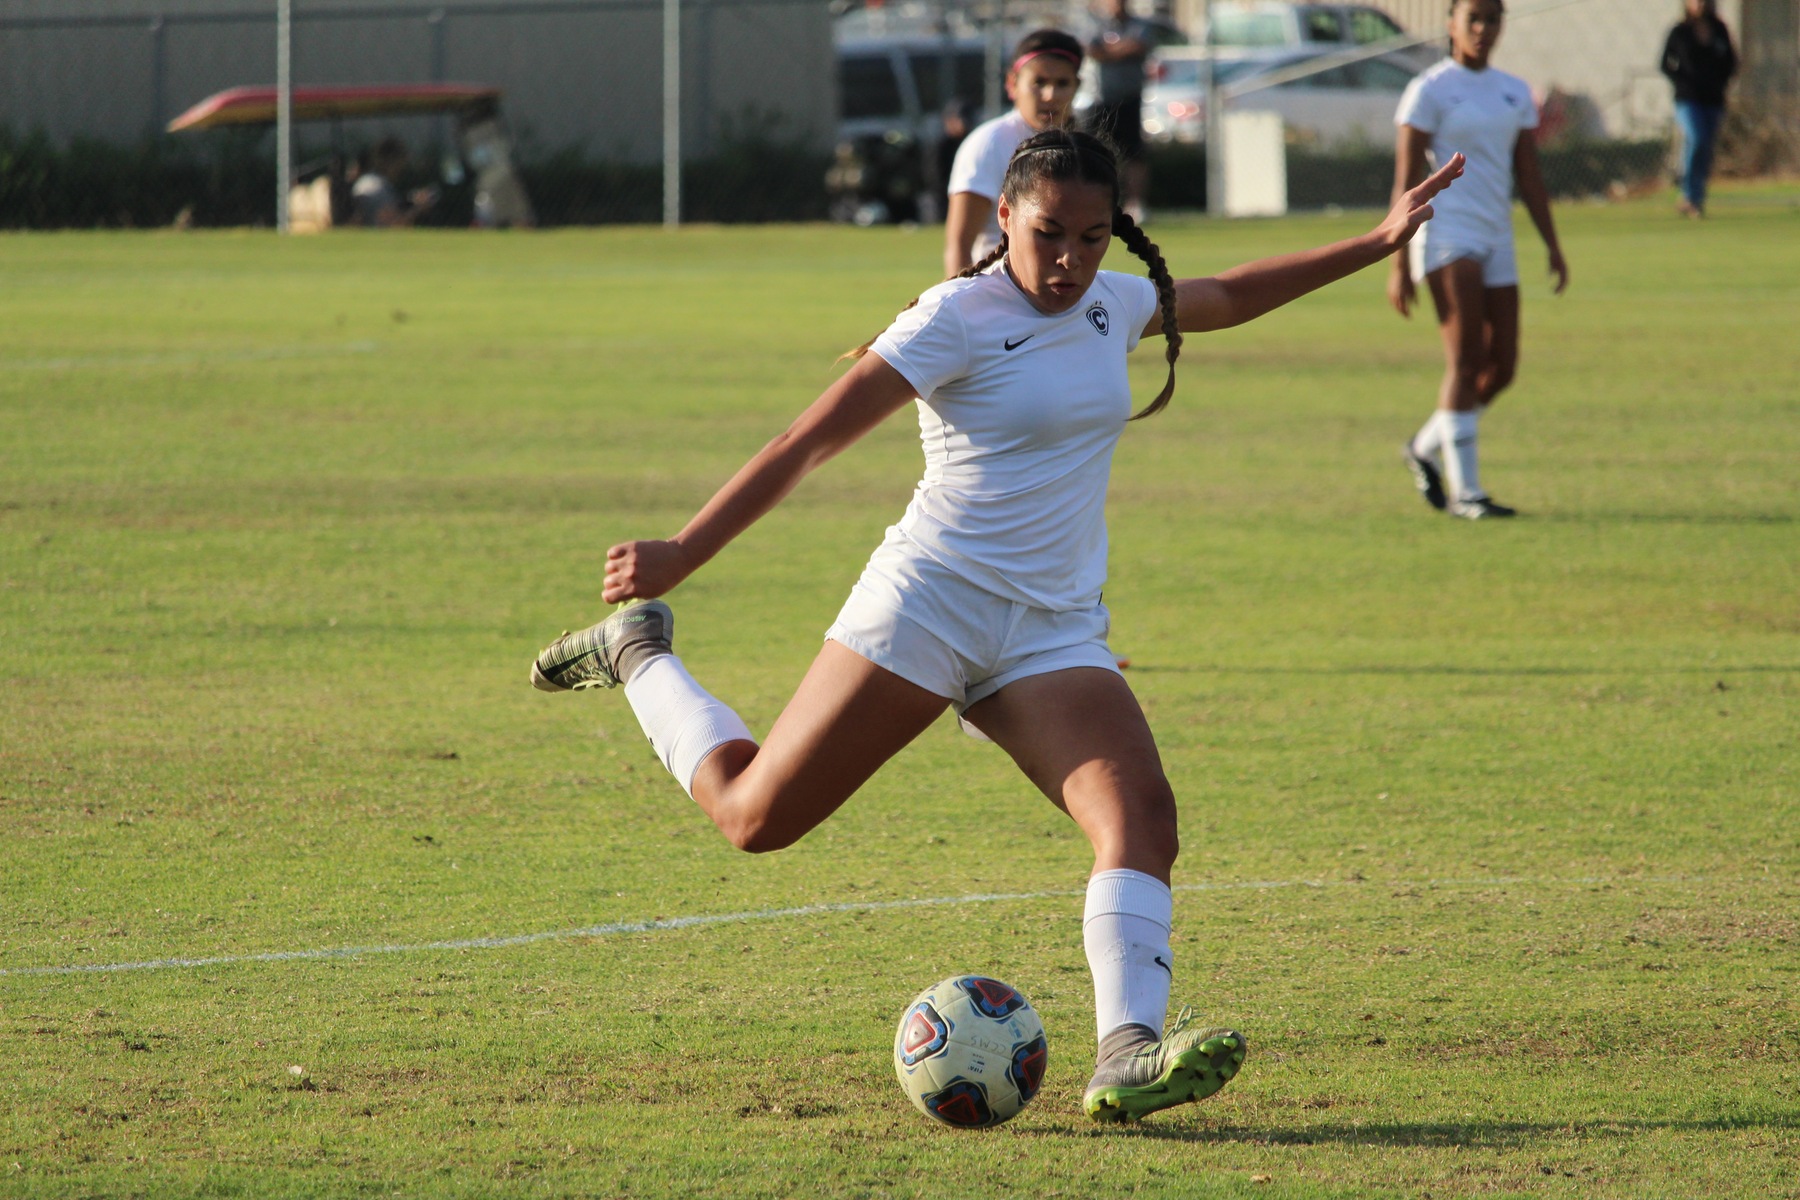 Lady Chargers Open 2019 Season with Back-to-Back Wins